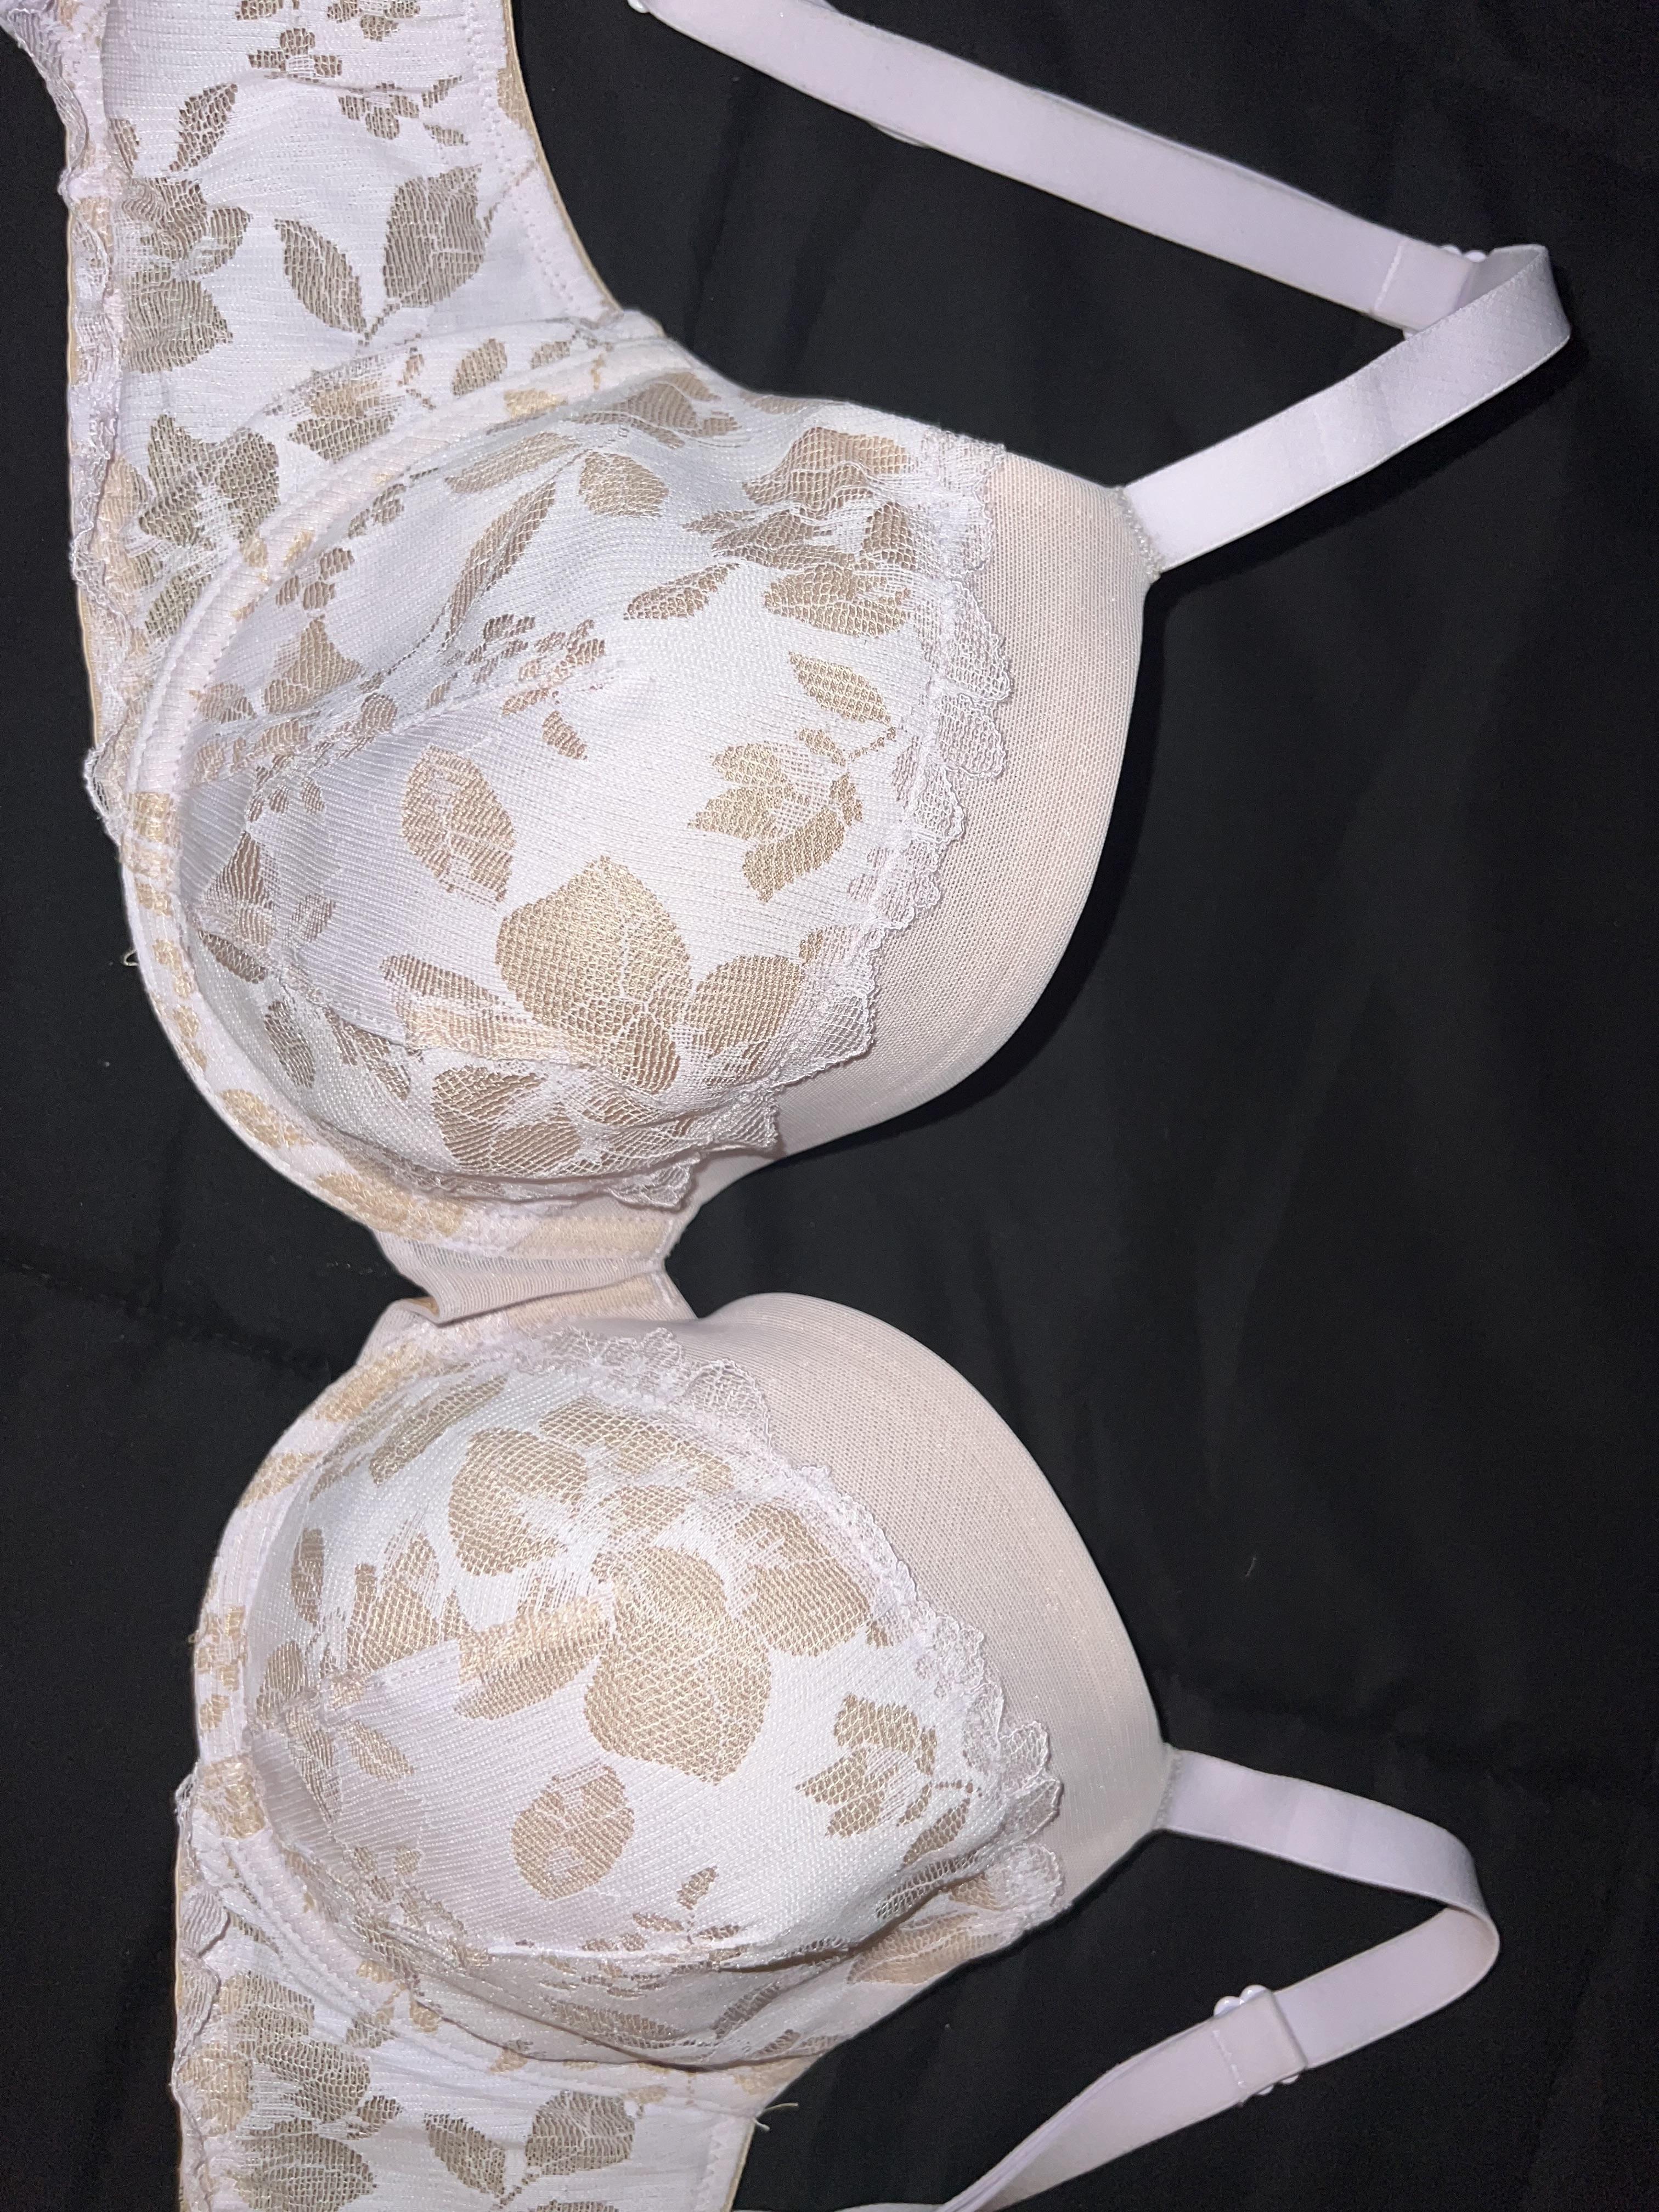 Victoria's Secret New BARE Angelight Full-Coverage Lace Bra Size undefined  - $25 New With Tags - From Yulianasuleidy